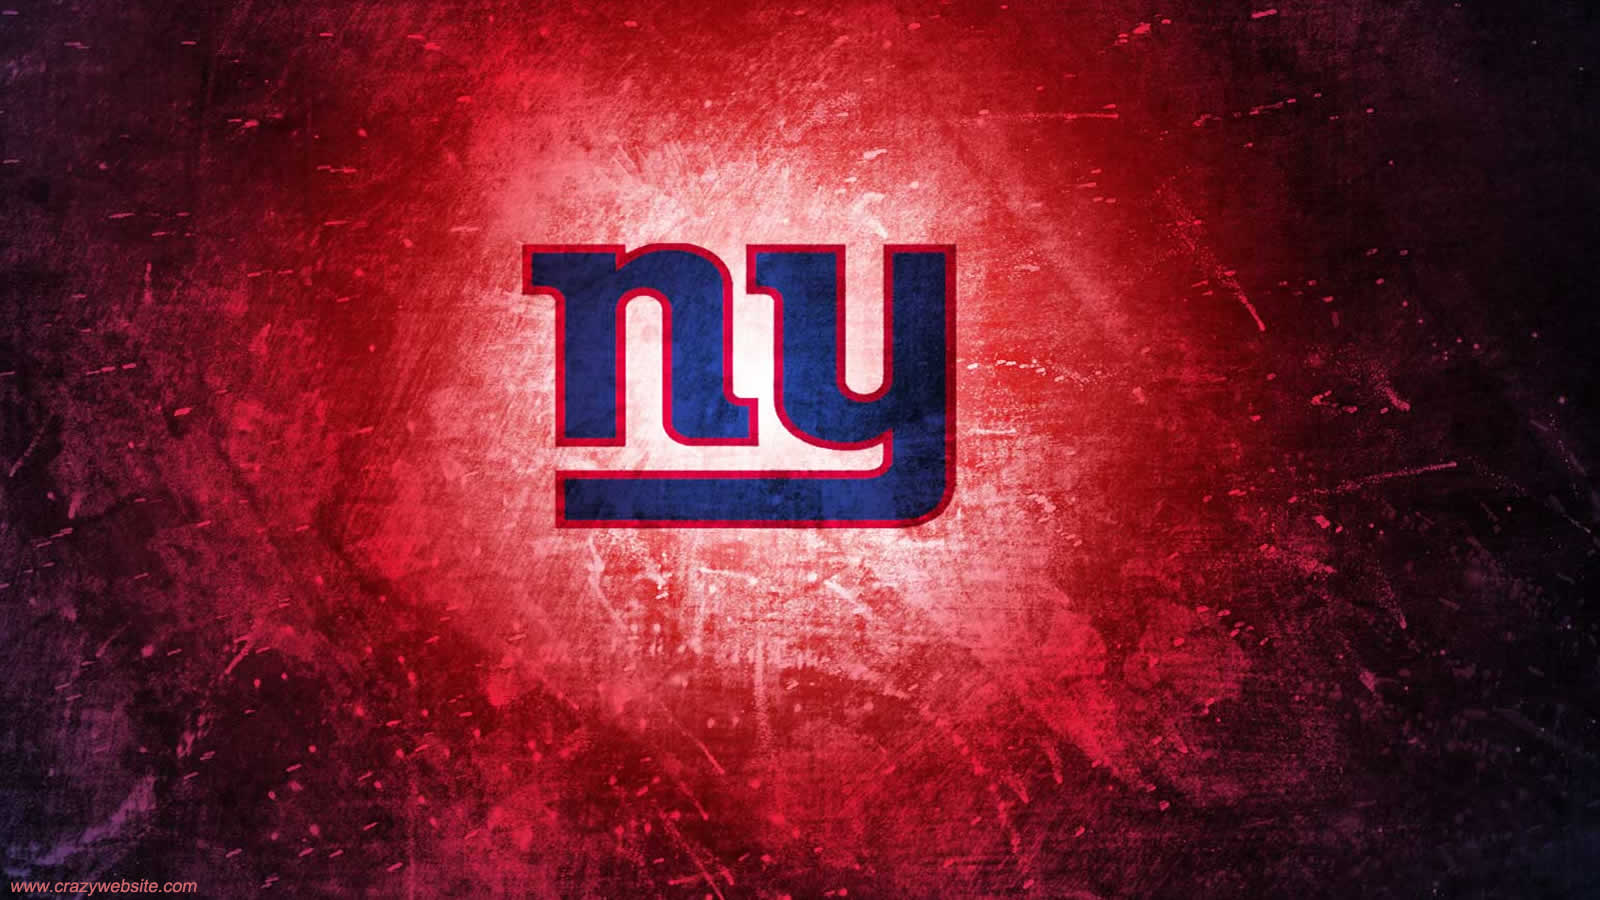 Hq Definition Nfl Teams, By Anwer Allibone - Cool Ny Giants Logos - HD Wallpaper 